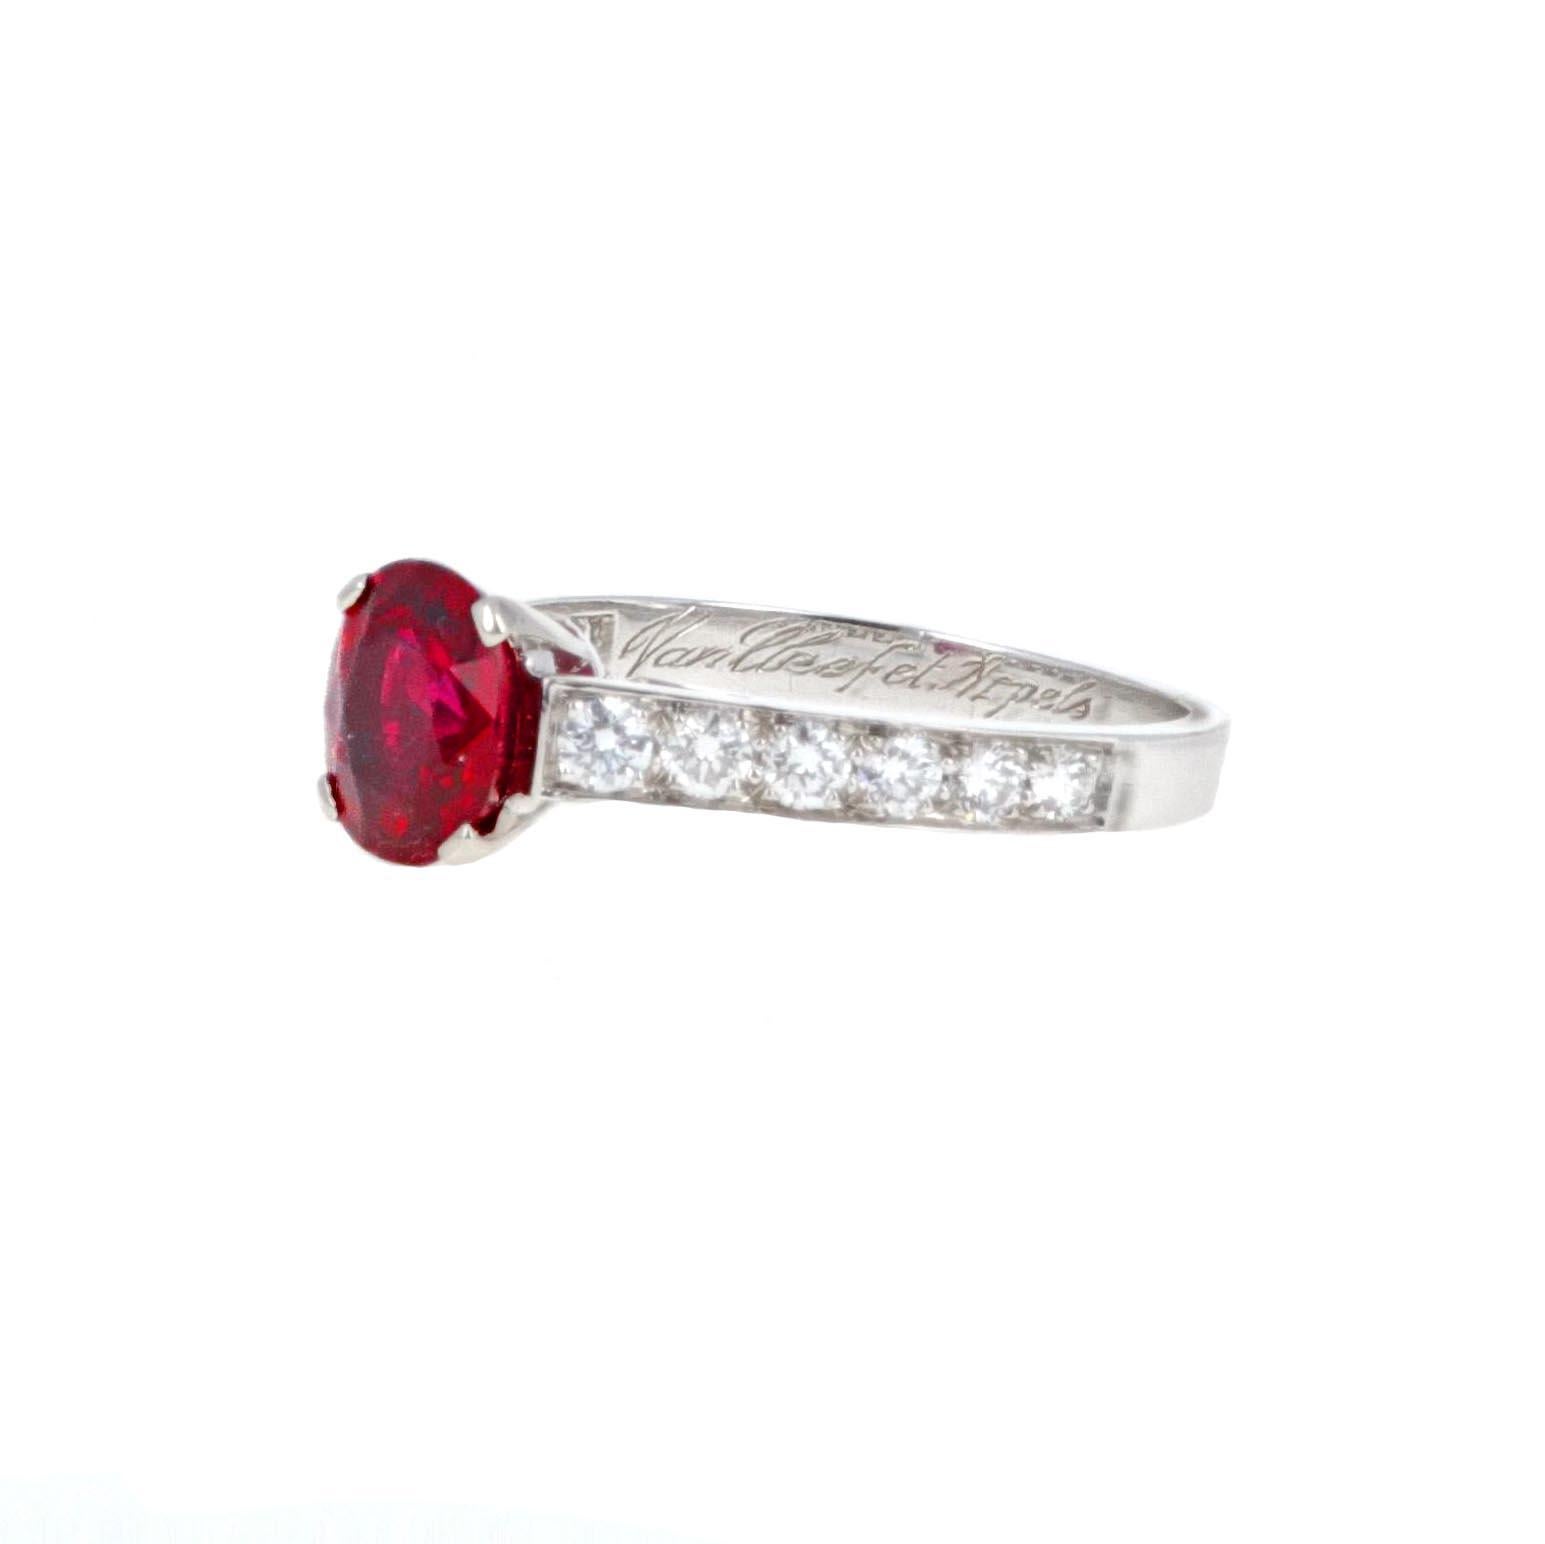 GIA Certified 1.38 carat  Burma no heat Pigeon’s Blood ruby and diamond ring by Van Cleep & Arpels. This is a true gem of a ruby. The Gemoligical Institute of America describes the ruby as a cushion brilliant weighing 1.38 carats. The stone measures